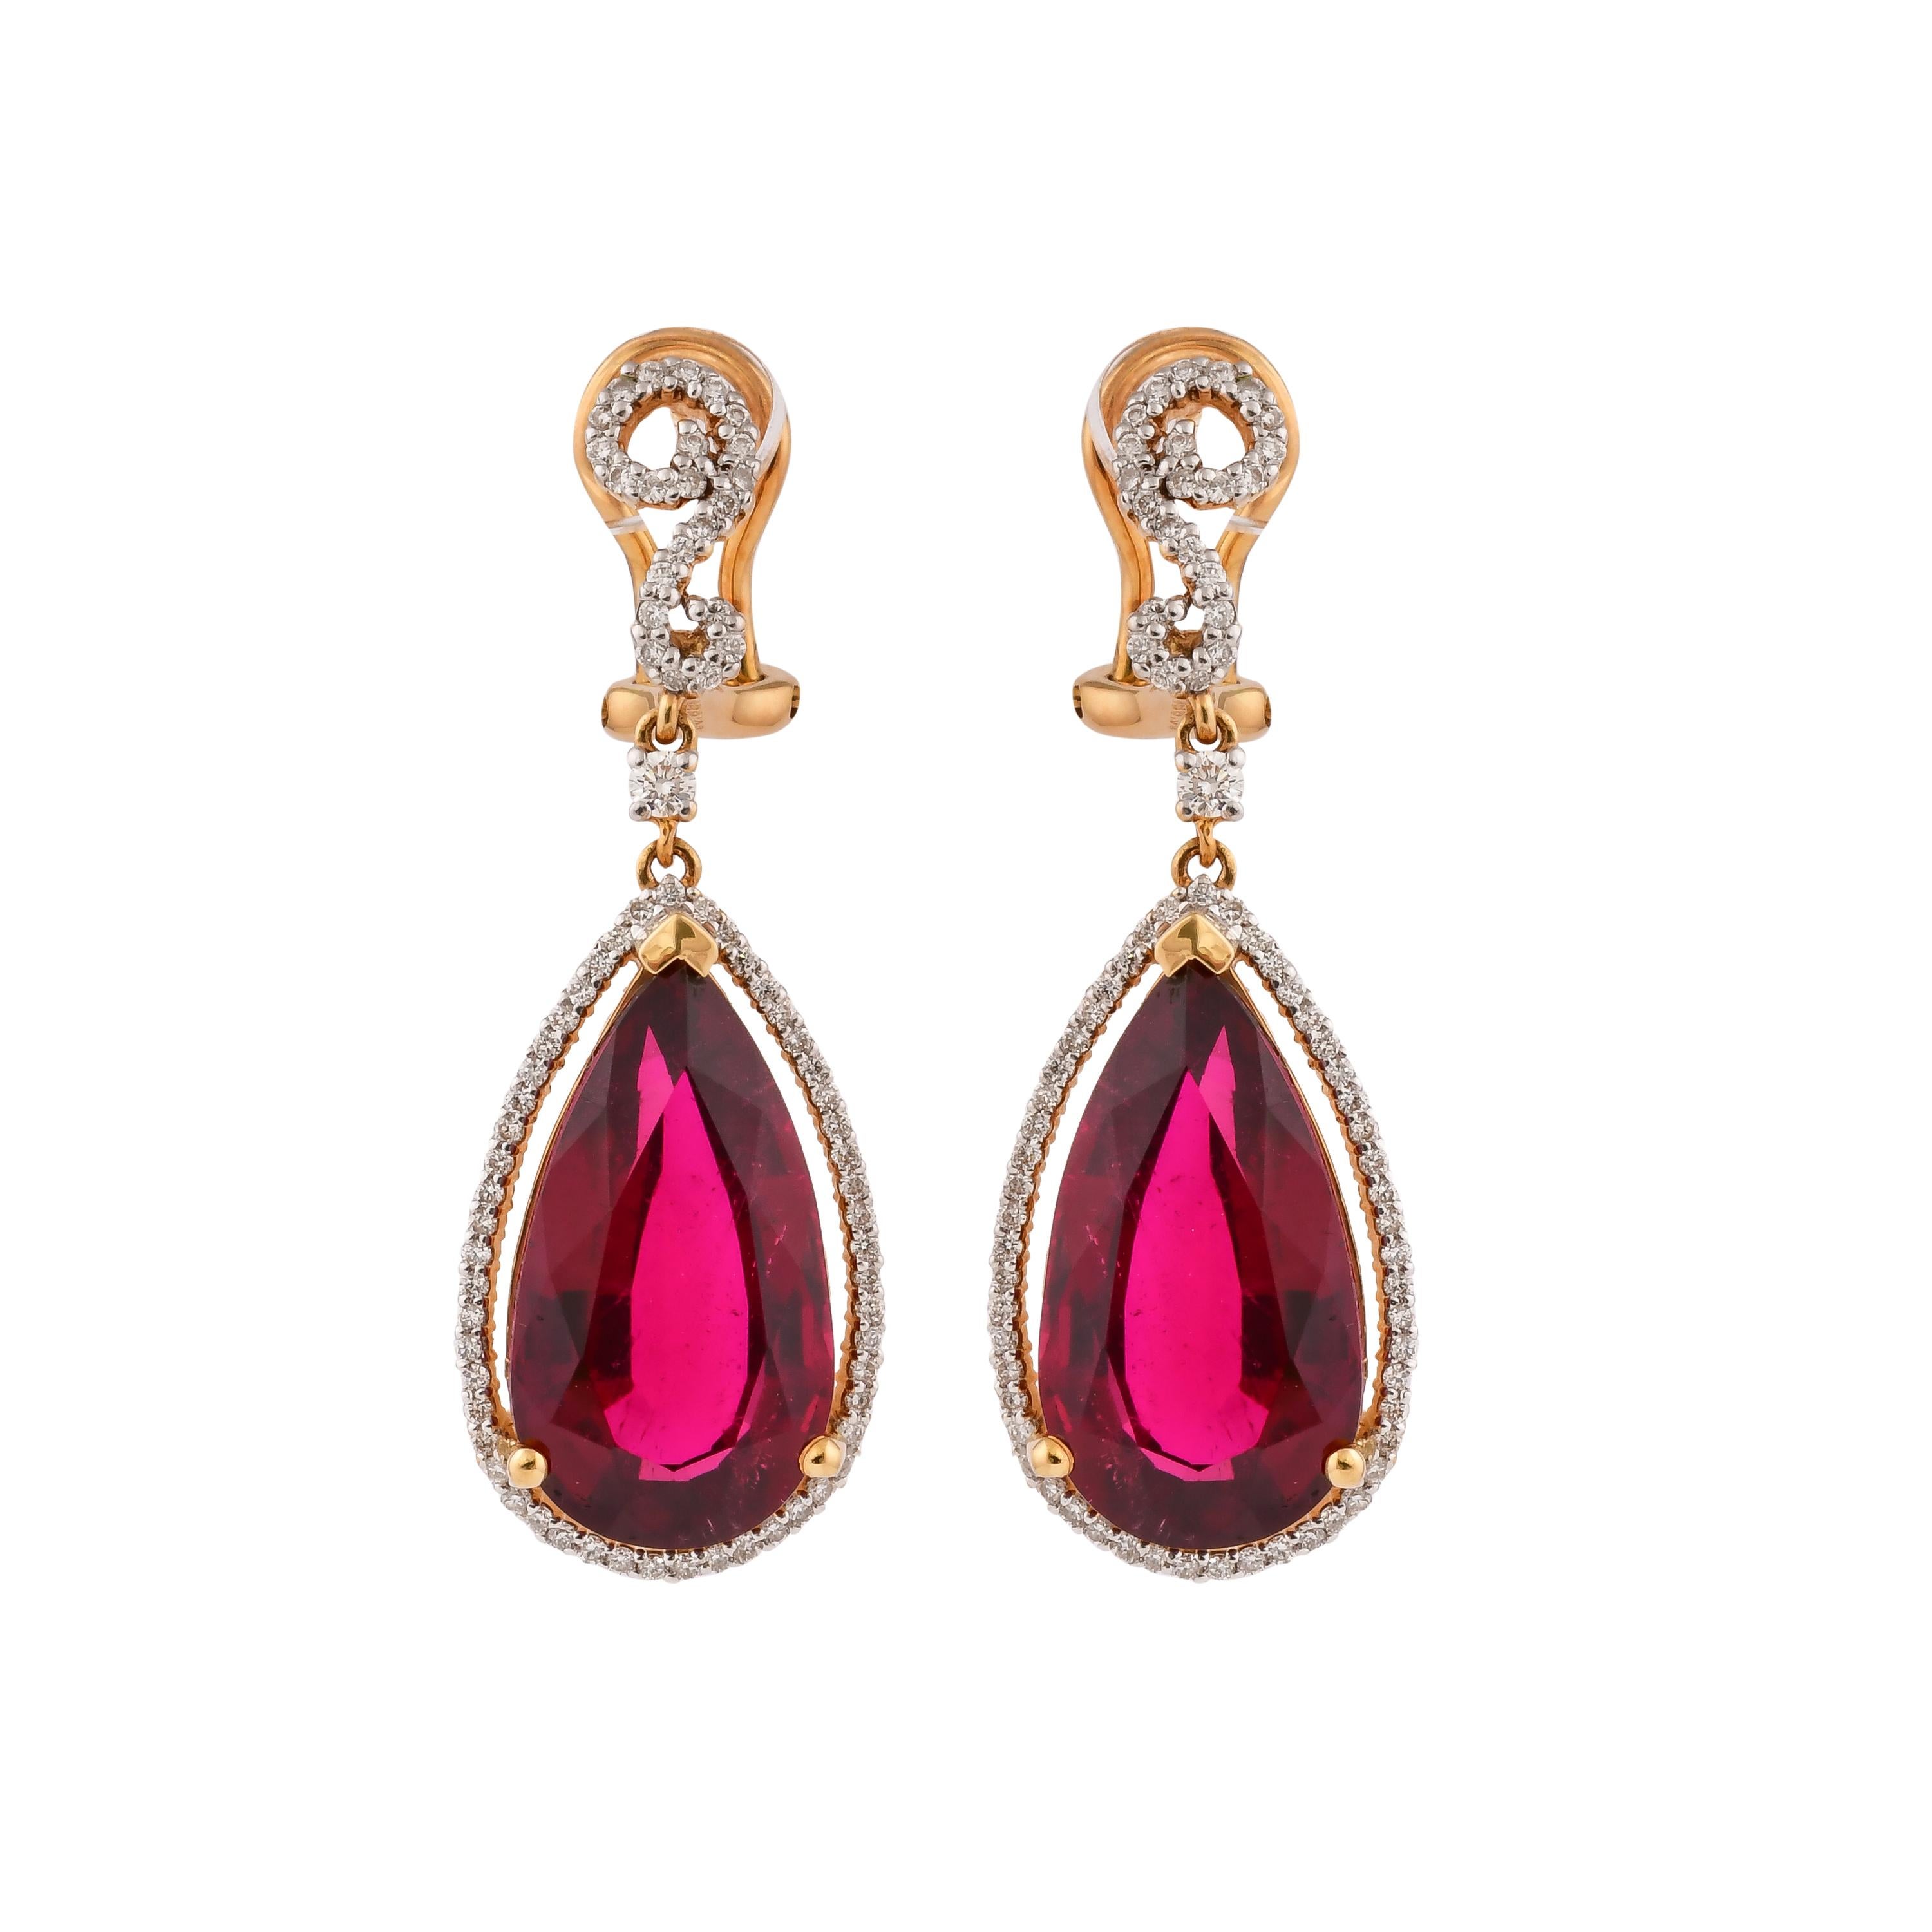 Contemporary 16.48 Carat Rubellite Tourmaline Earring with Diamond in 18 Karat Yellow Gold For Sale